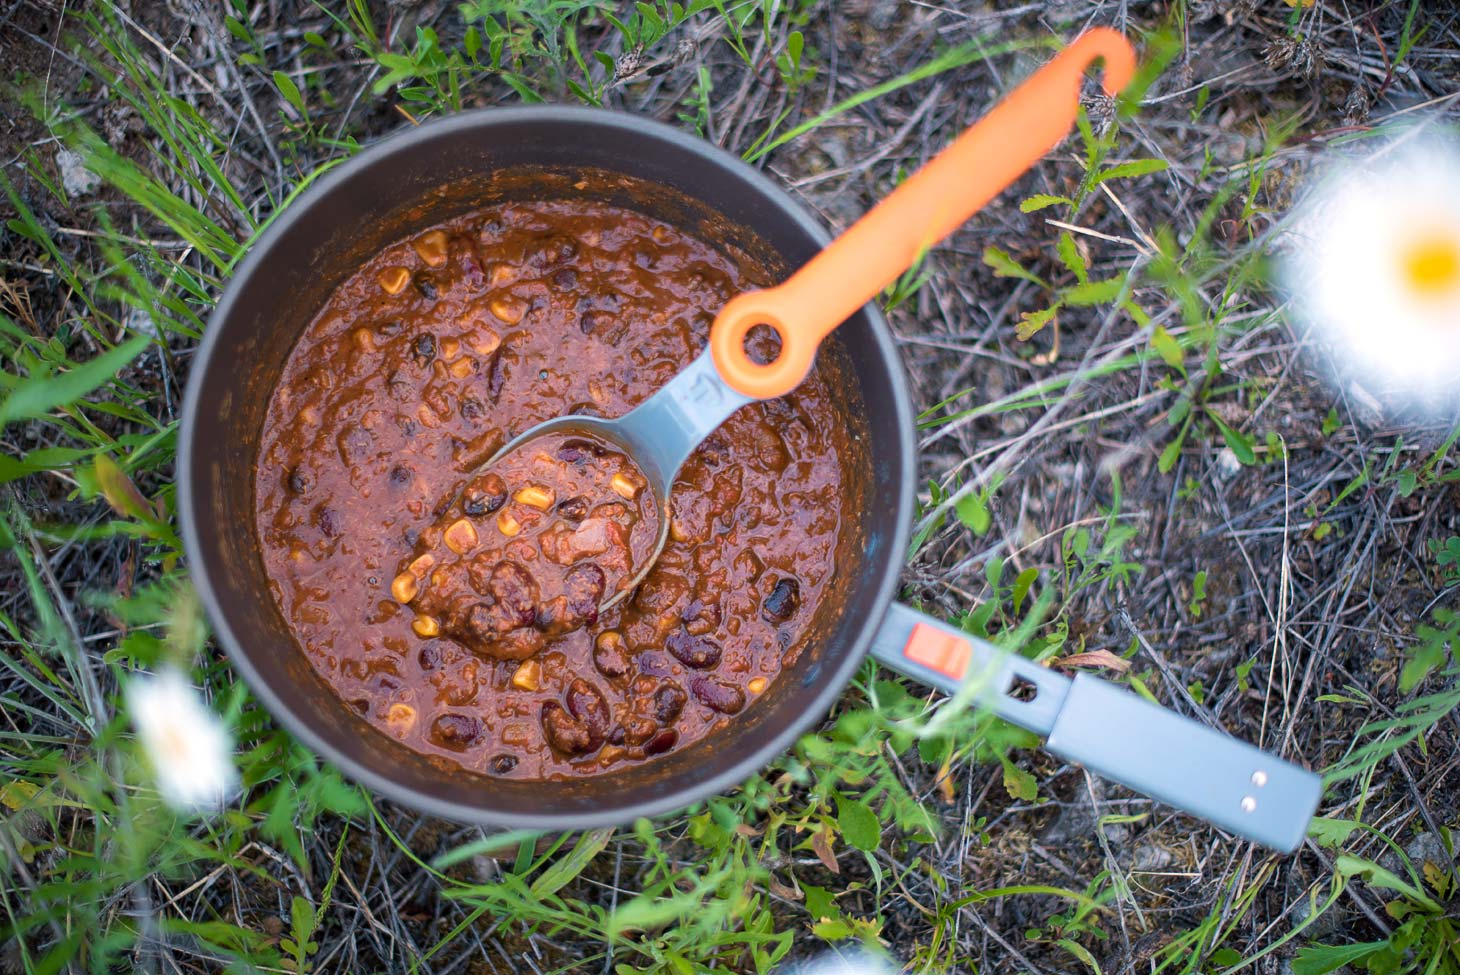 DIY Backpacking Food - a healthy vegan quinoa chili made with a dehydrator, perfect for your backcountry adventures.